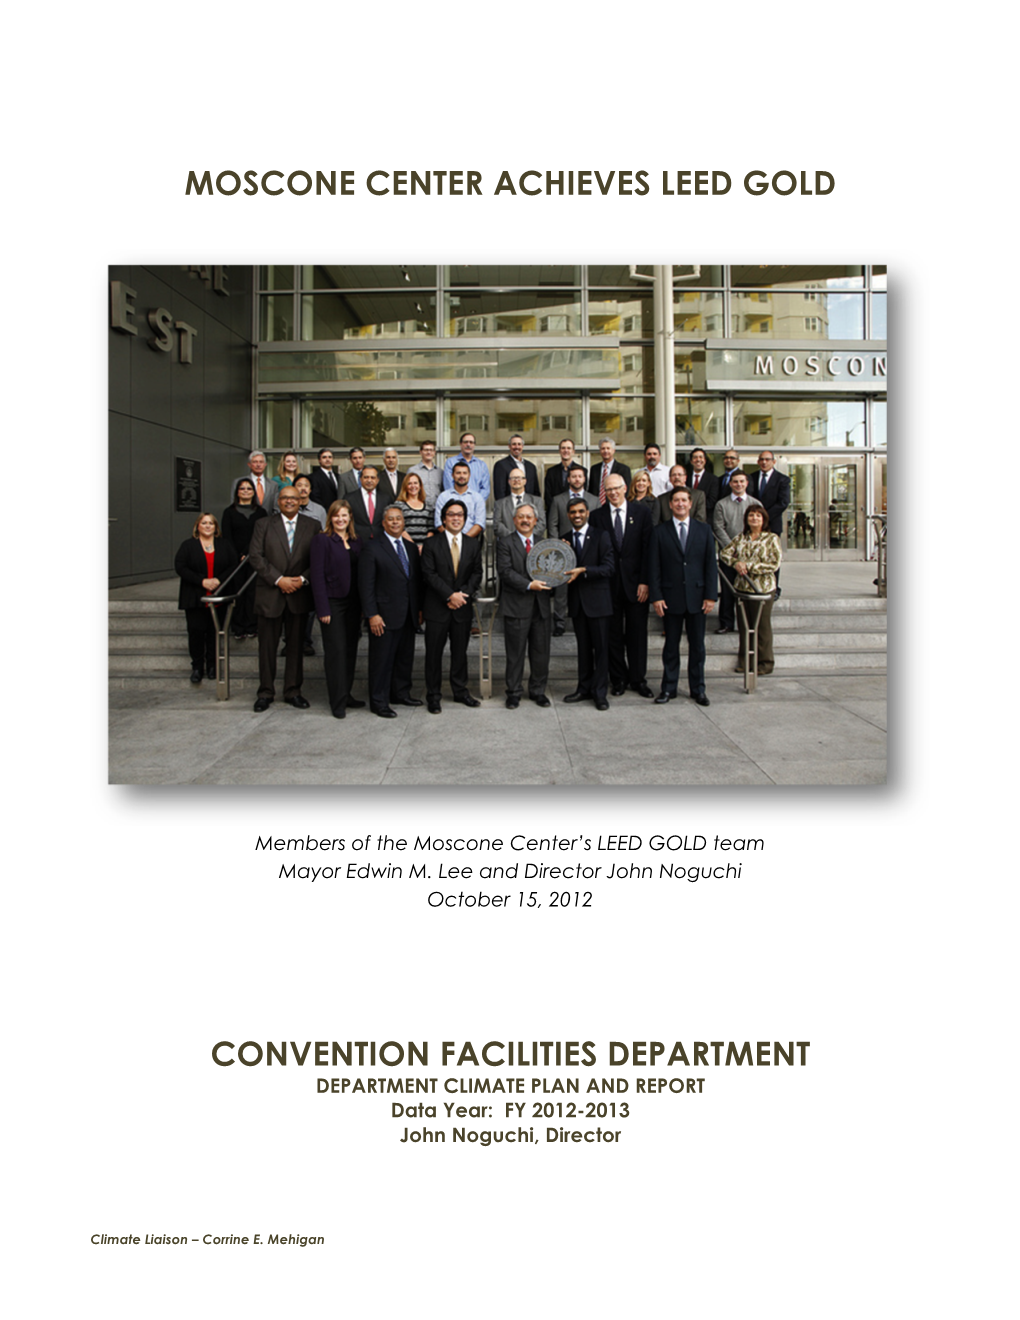 Moscone Center Achieves Leed Gold Convention